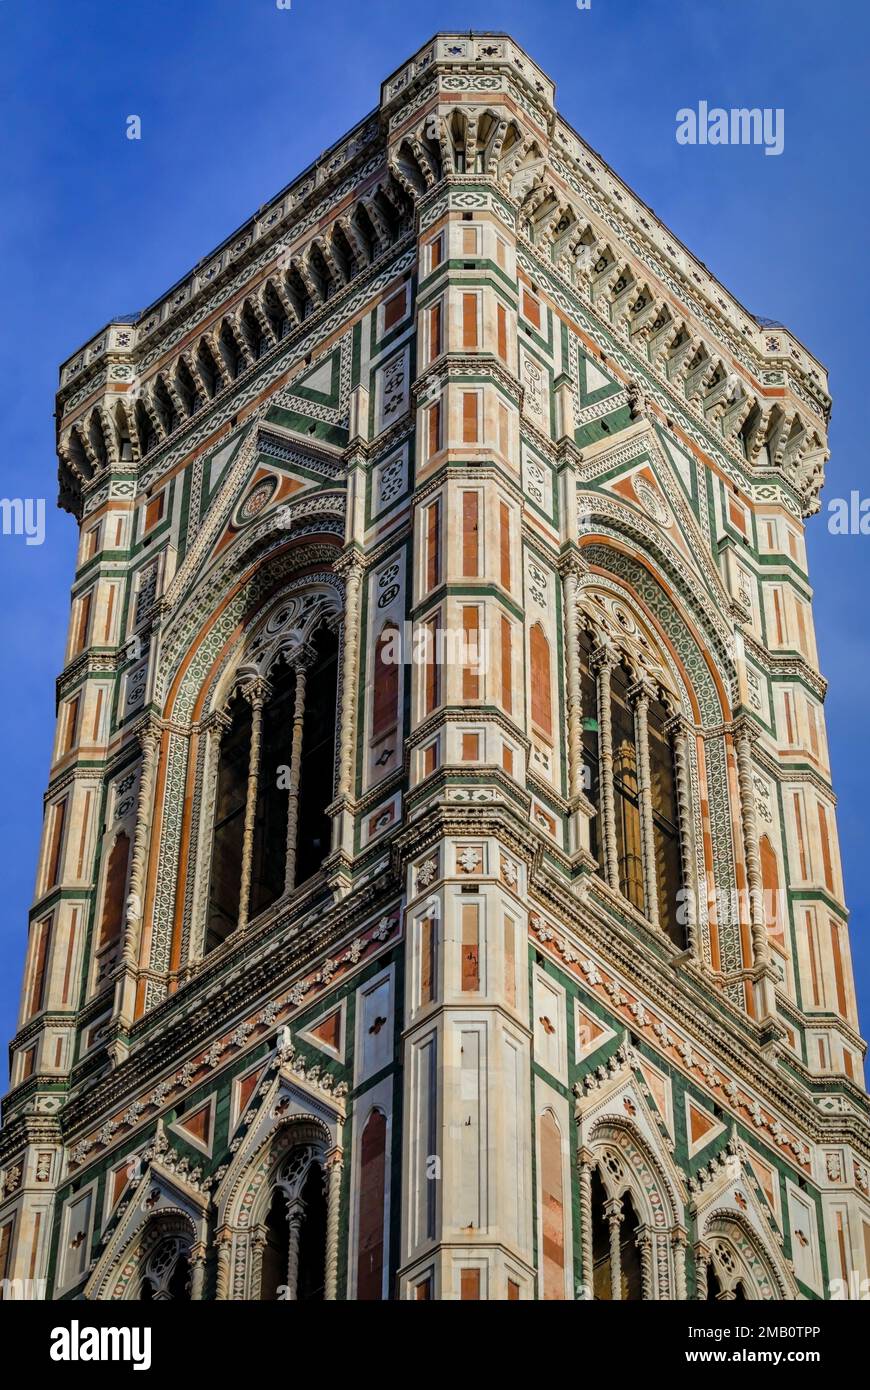 Colored marble facade of Giotto Campanile bell tower in the Duomo Cathedral or Cattedrale di Santa Maria del Fiore complex in Florence, Italy Stock Photo